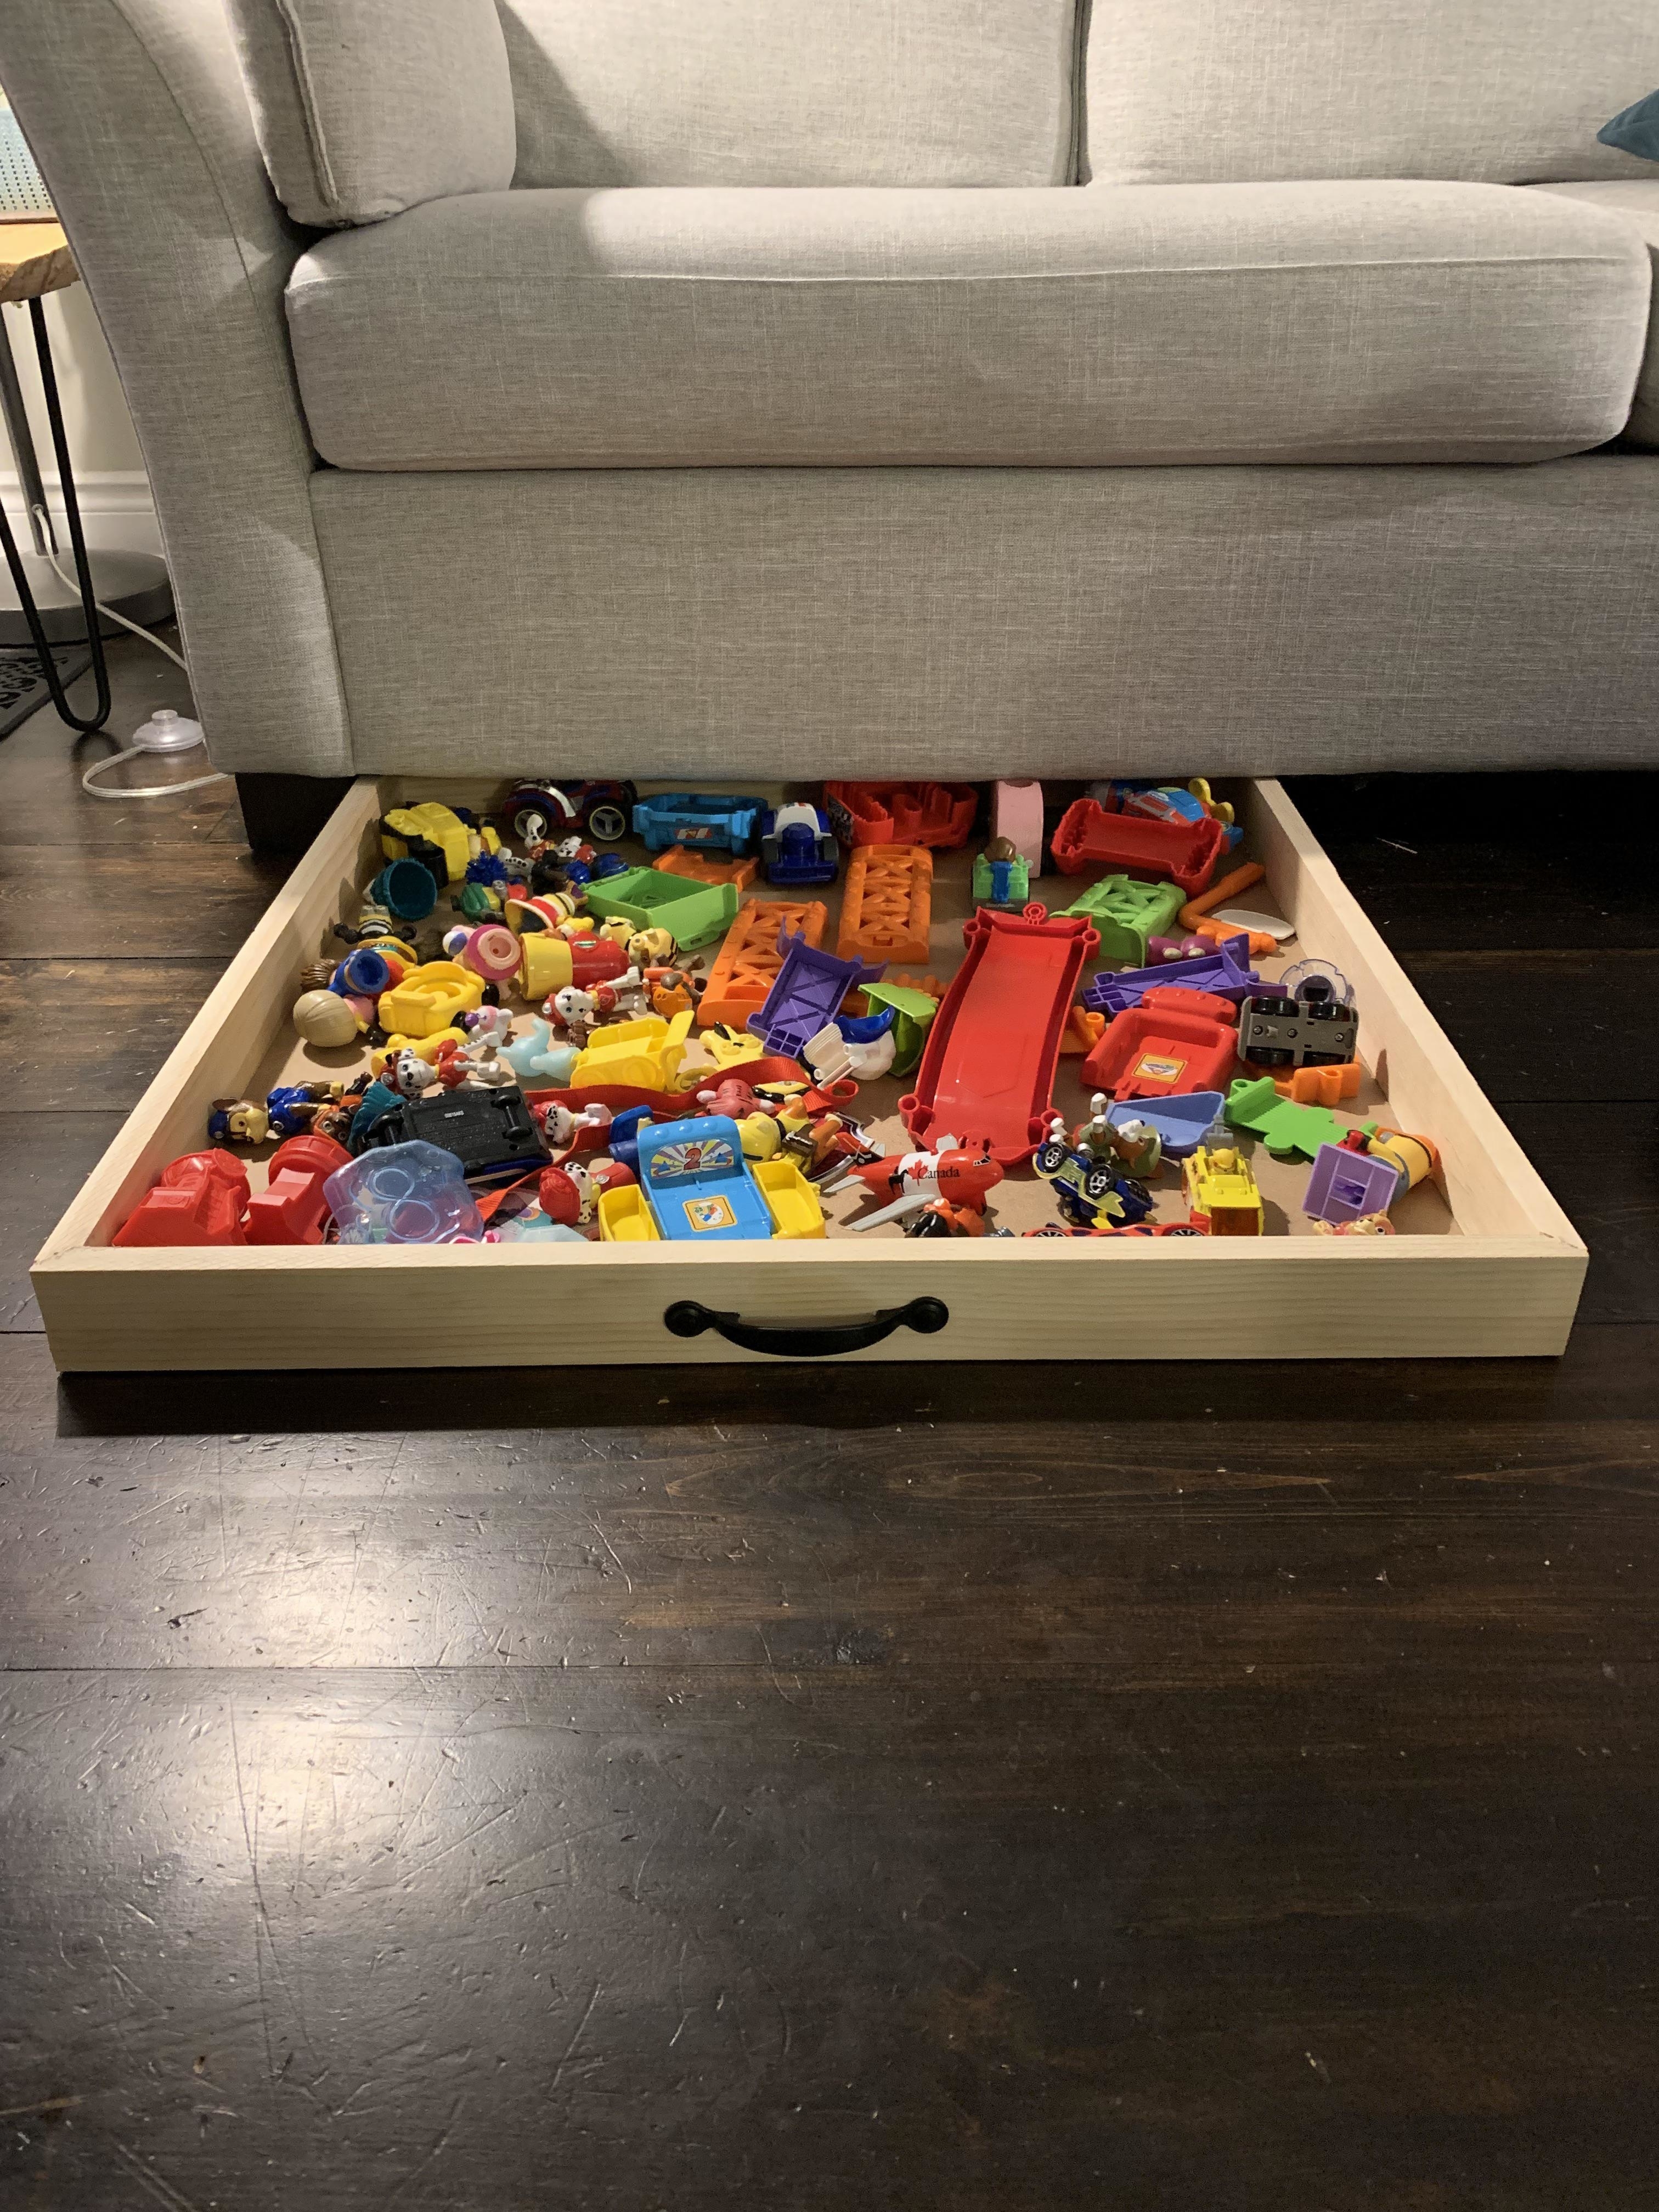 Roll-out bin under the couch to hold kids&#x27; toys